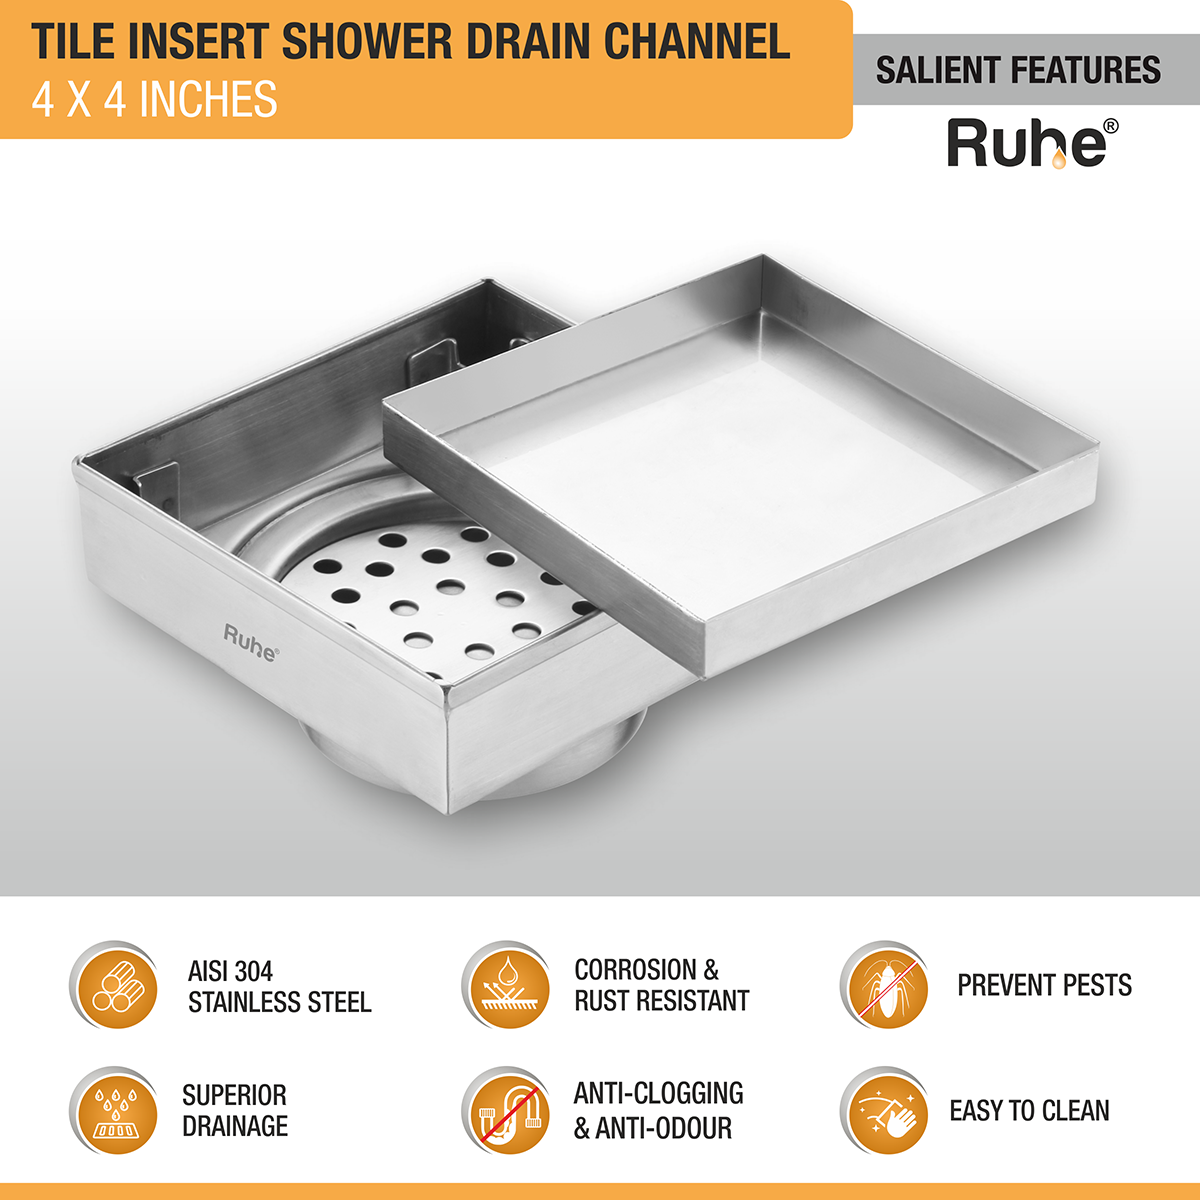 Tile Insert Shower Drain Channel (4 x 4 Inches) with Cockroach Trap (304 Grade) features and benefits